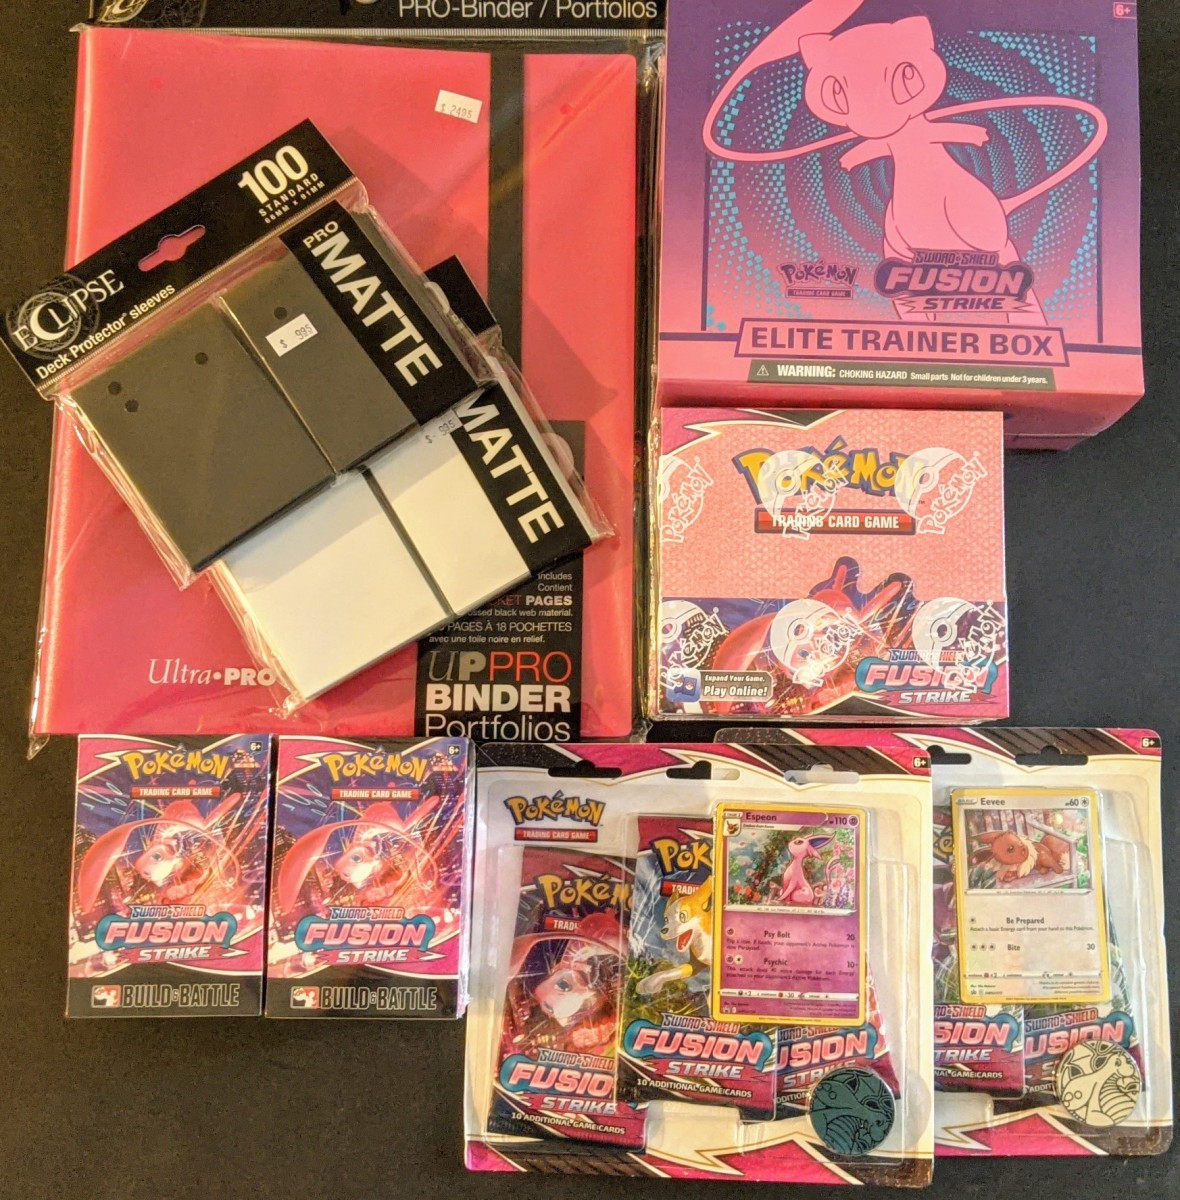 Fusion Strike Master Purchase - ETB - 3 Pack Blisters - Pink Binder - Build and Battle Boxes - 36 Pack Boster Box